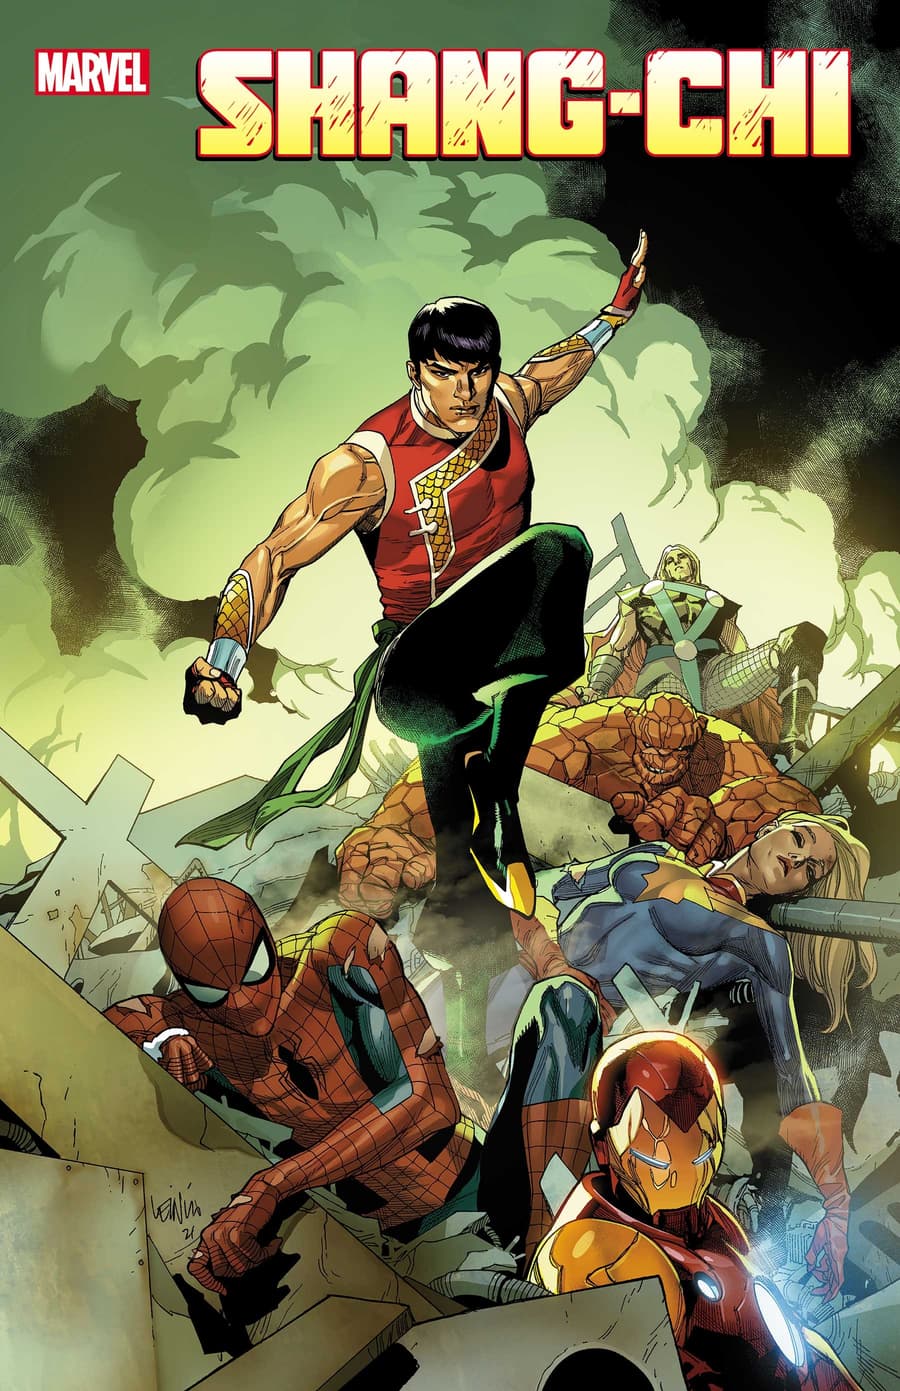 Cover to SHANG-CHI (2021) #1 by Leinil Francis Yu.